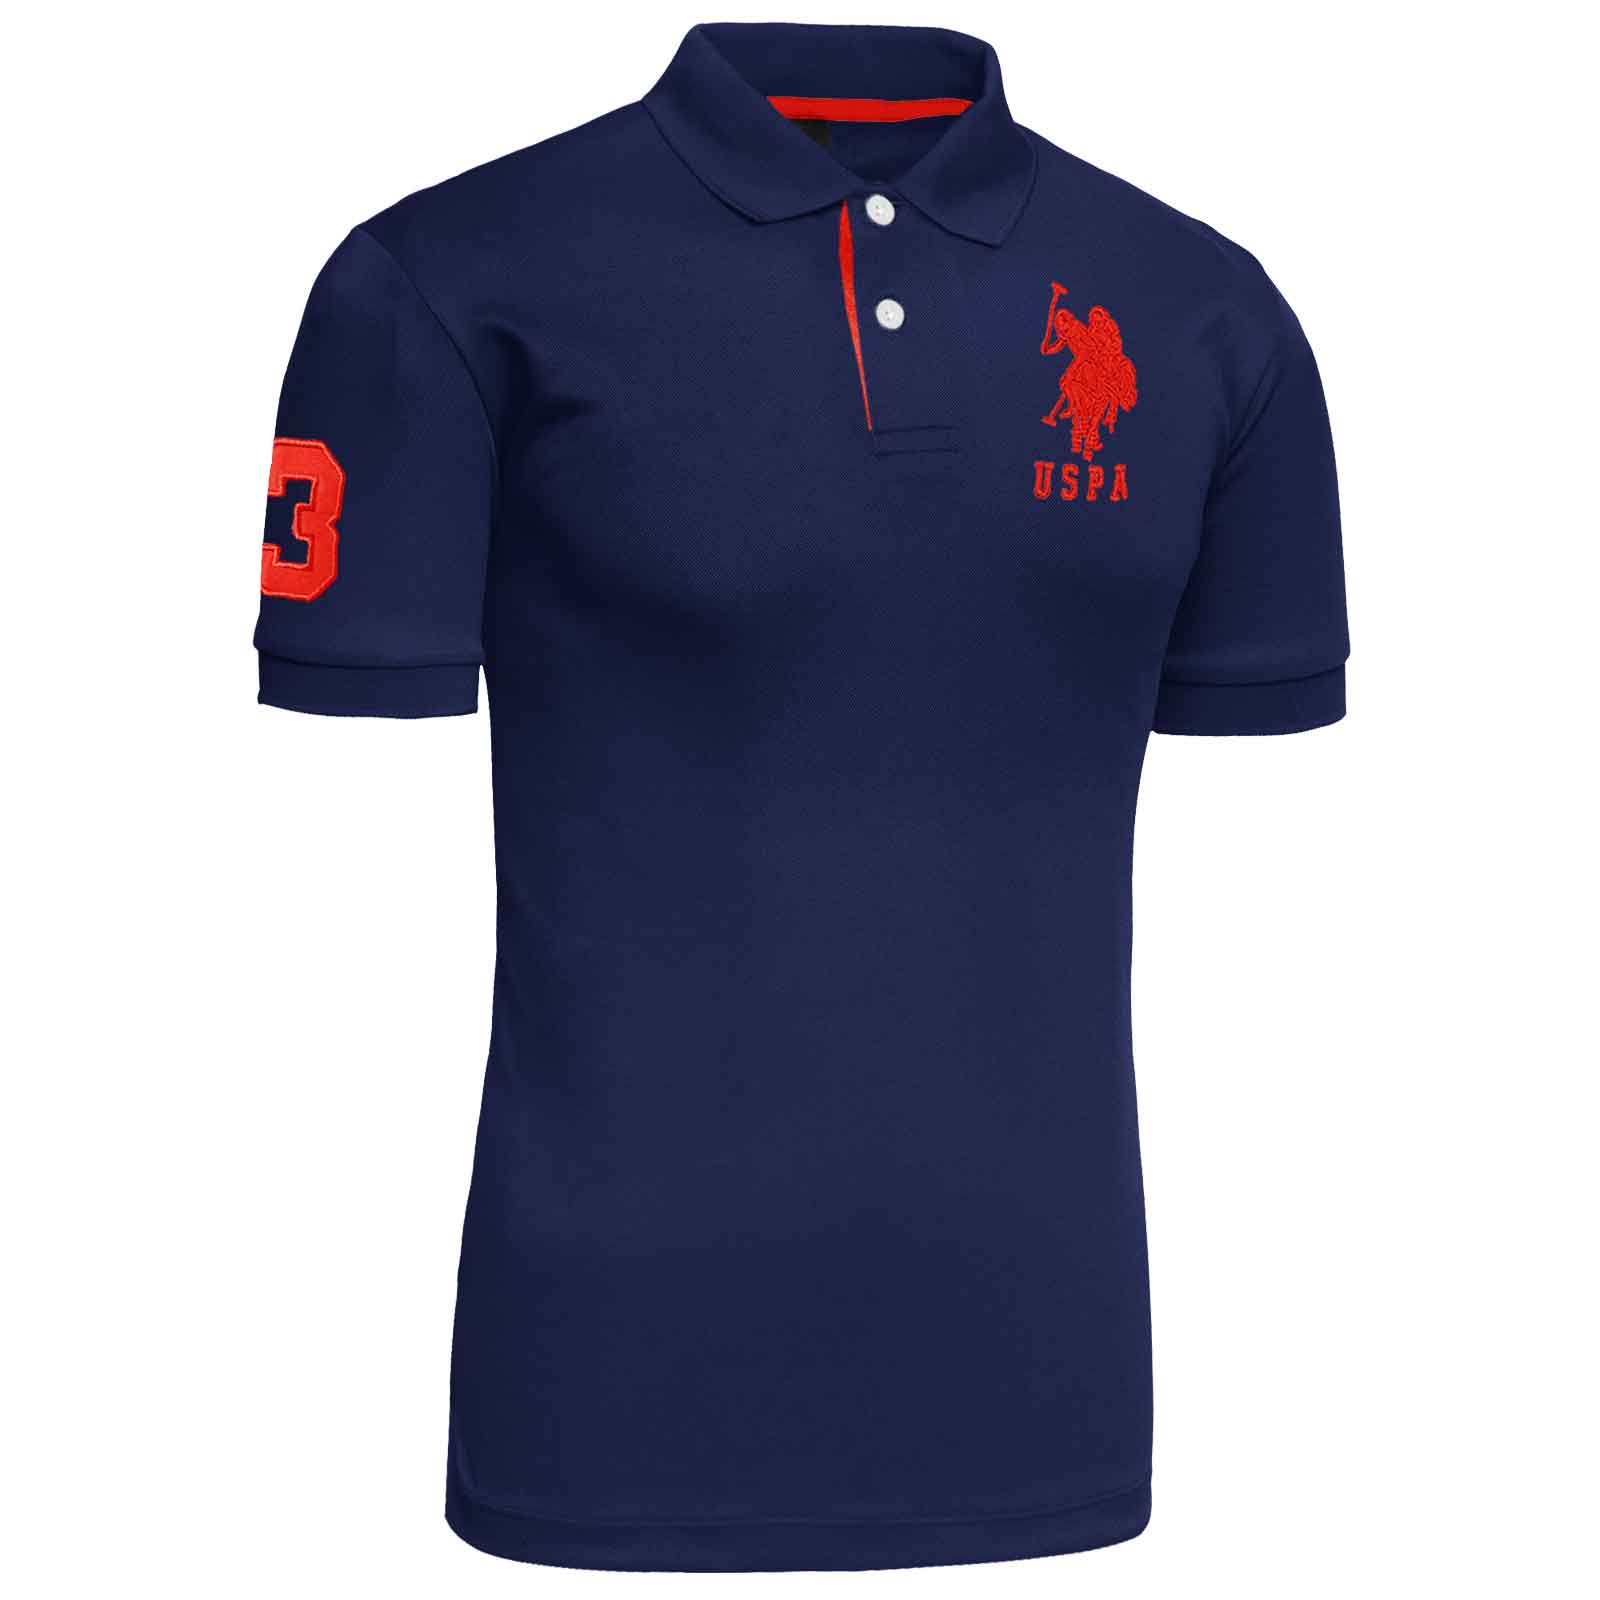 Buy polo jersey shirt - 57% OFF!